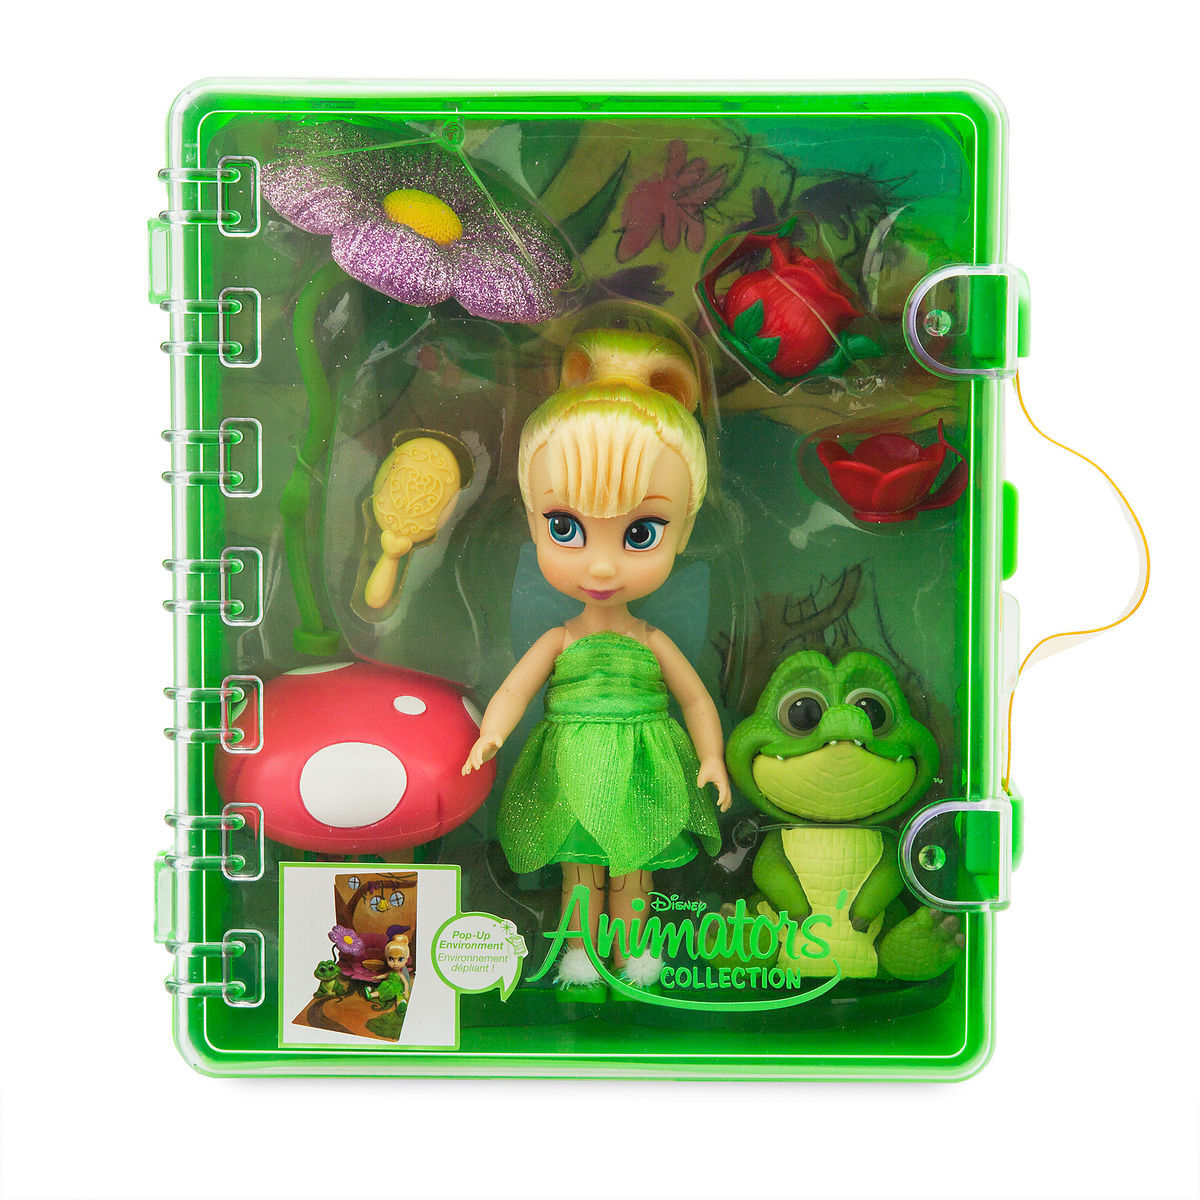 Disney Animators' Little Collection Tinker Bell Mini Doll Playset New With Tags